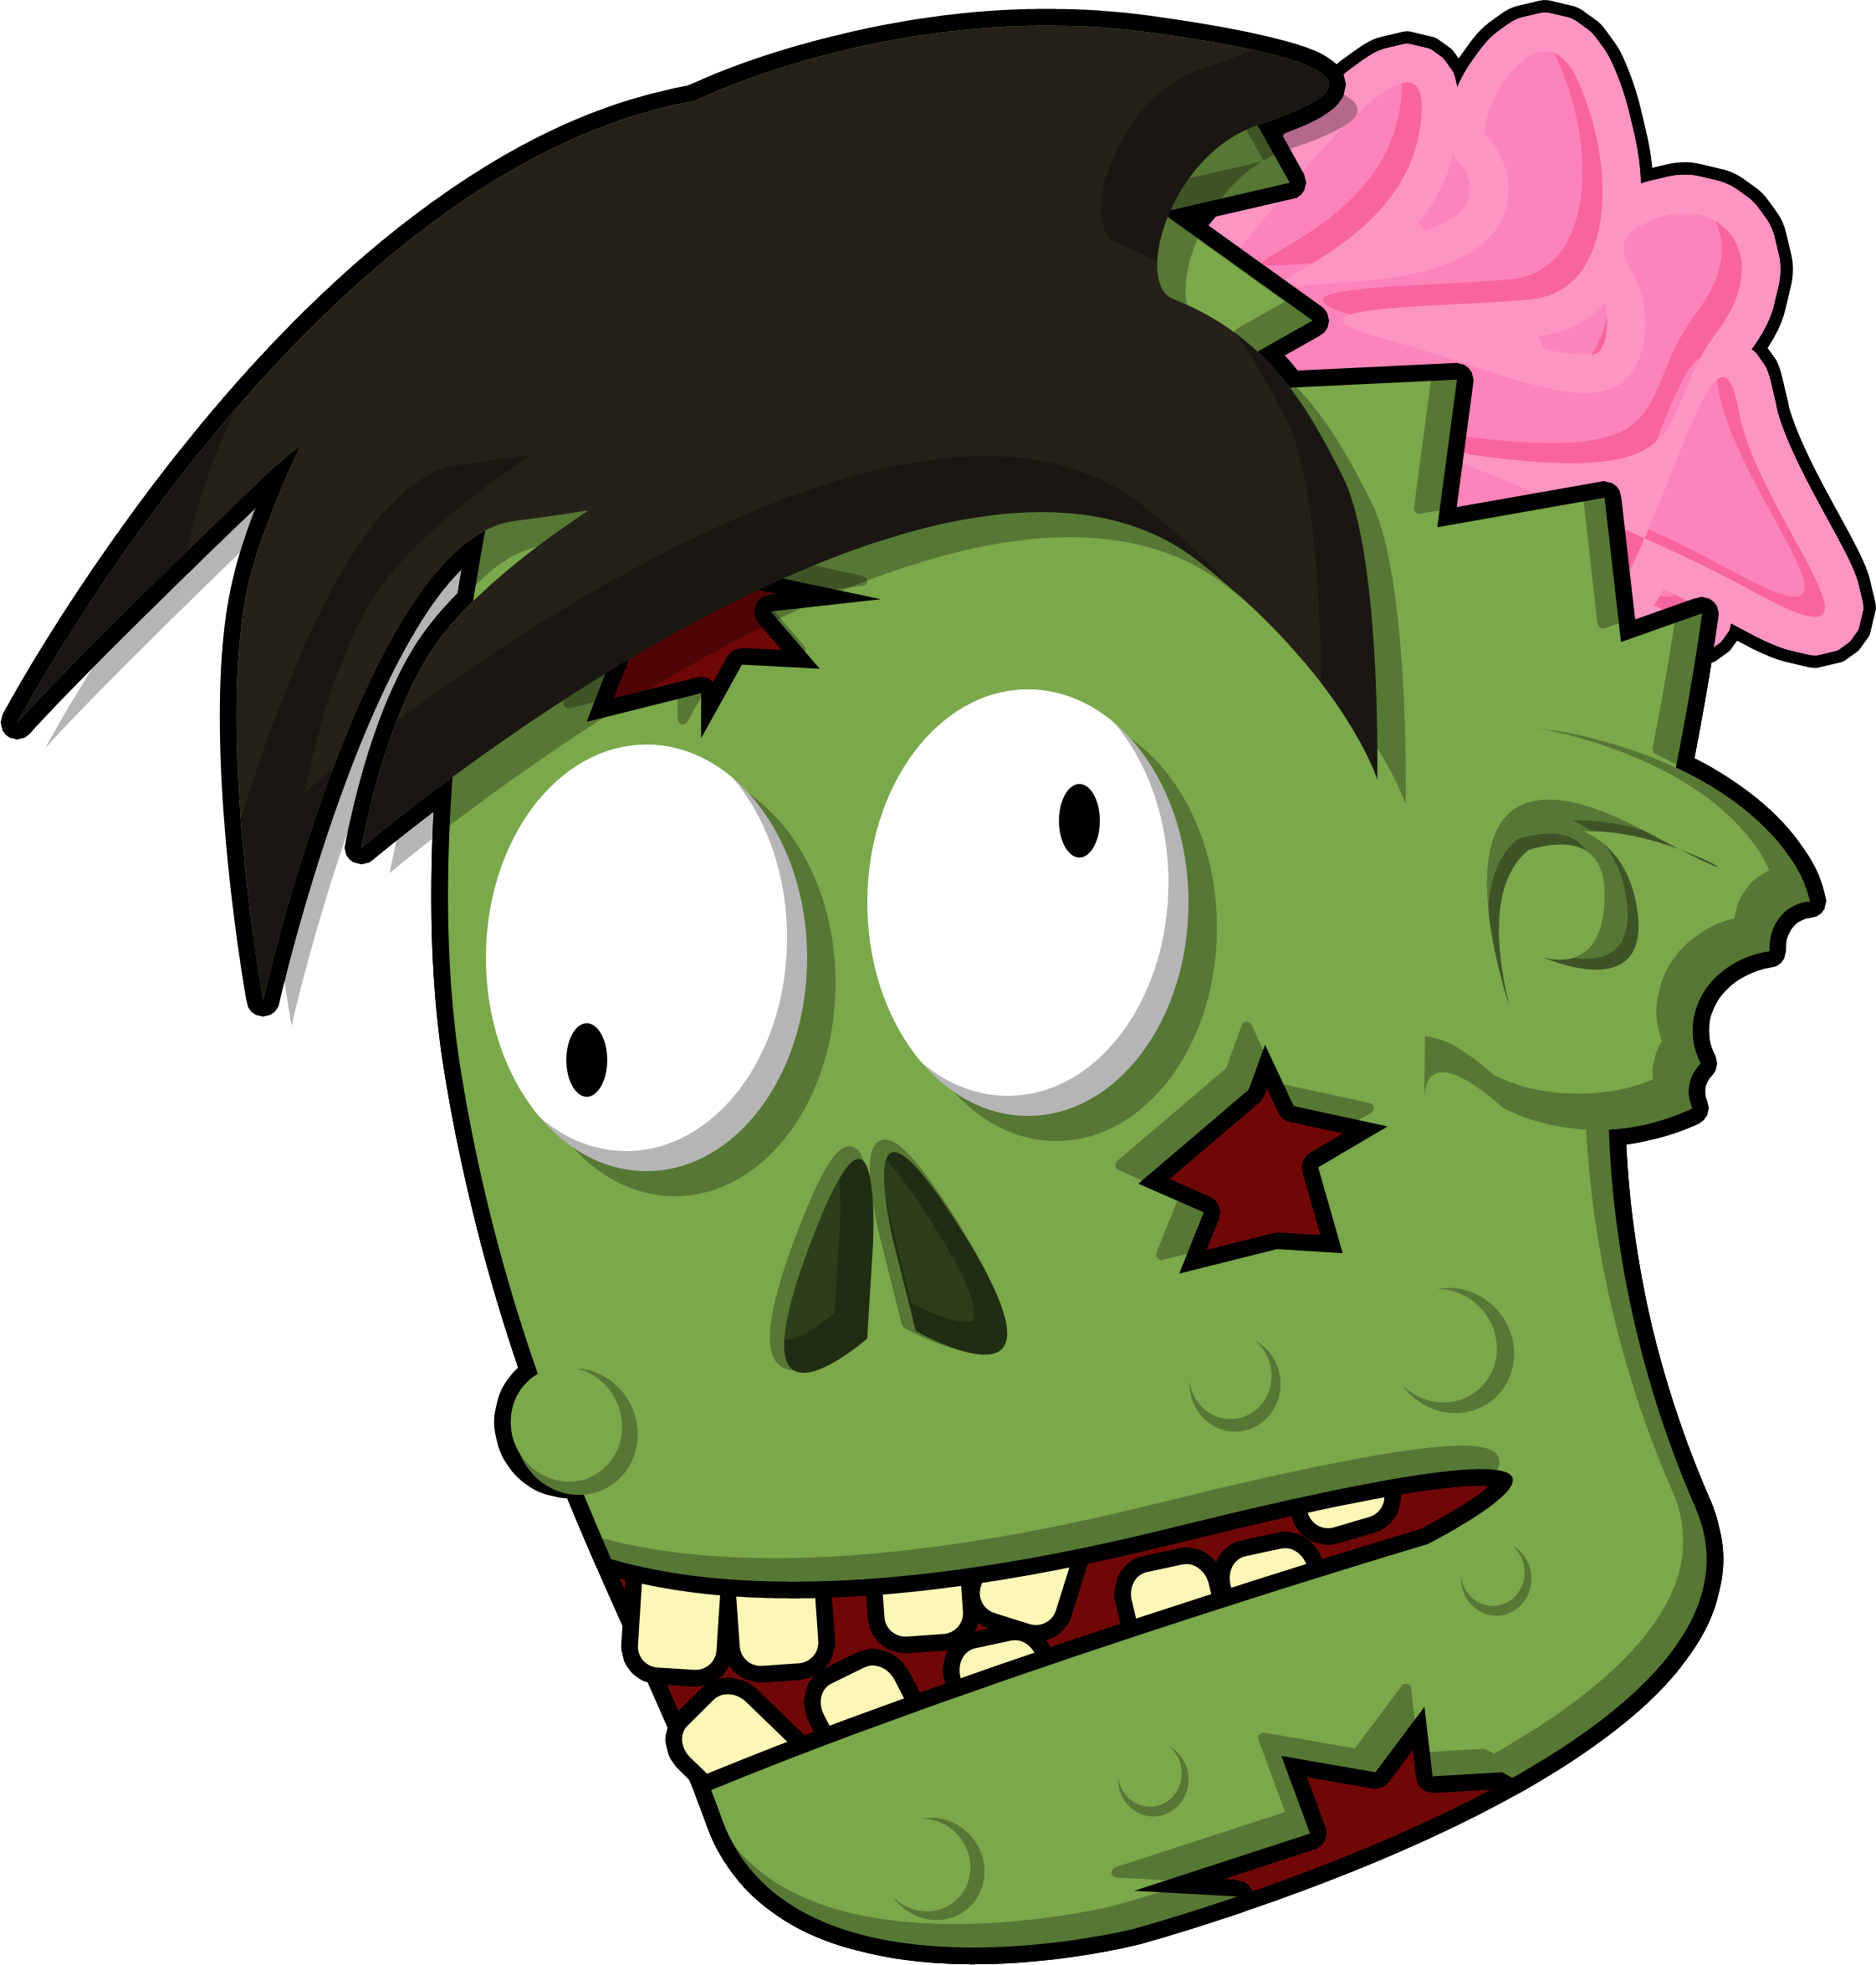 Zombie Vector By Floodgrunt Zombie Vector By Floodgrunt - Zombi Vector Png (2243x2349)